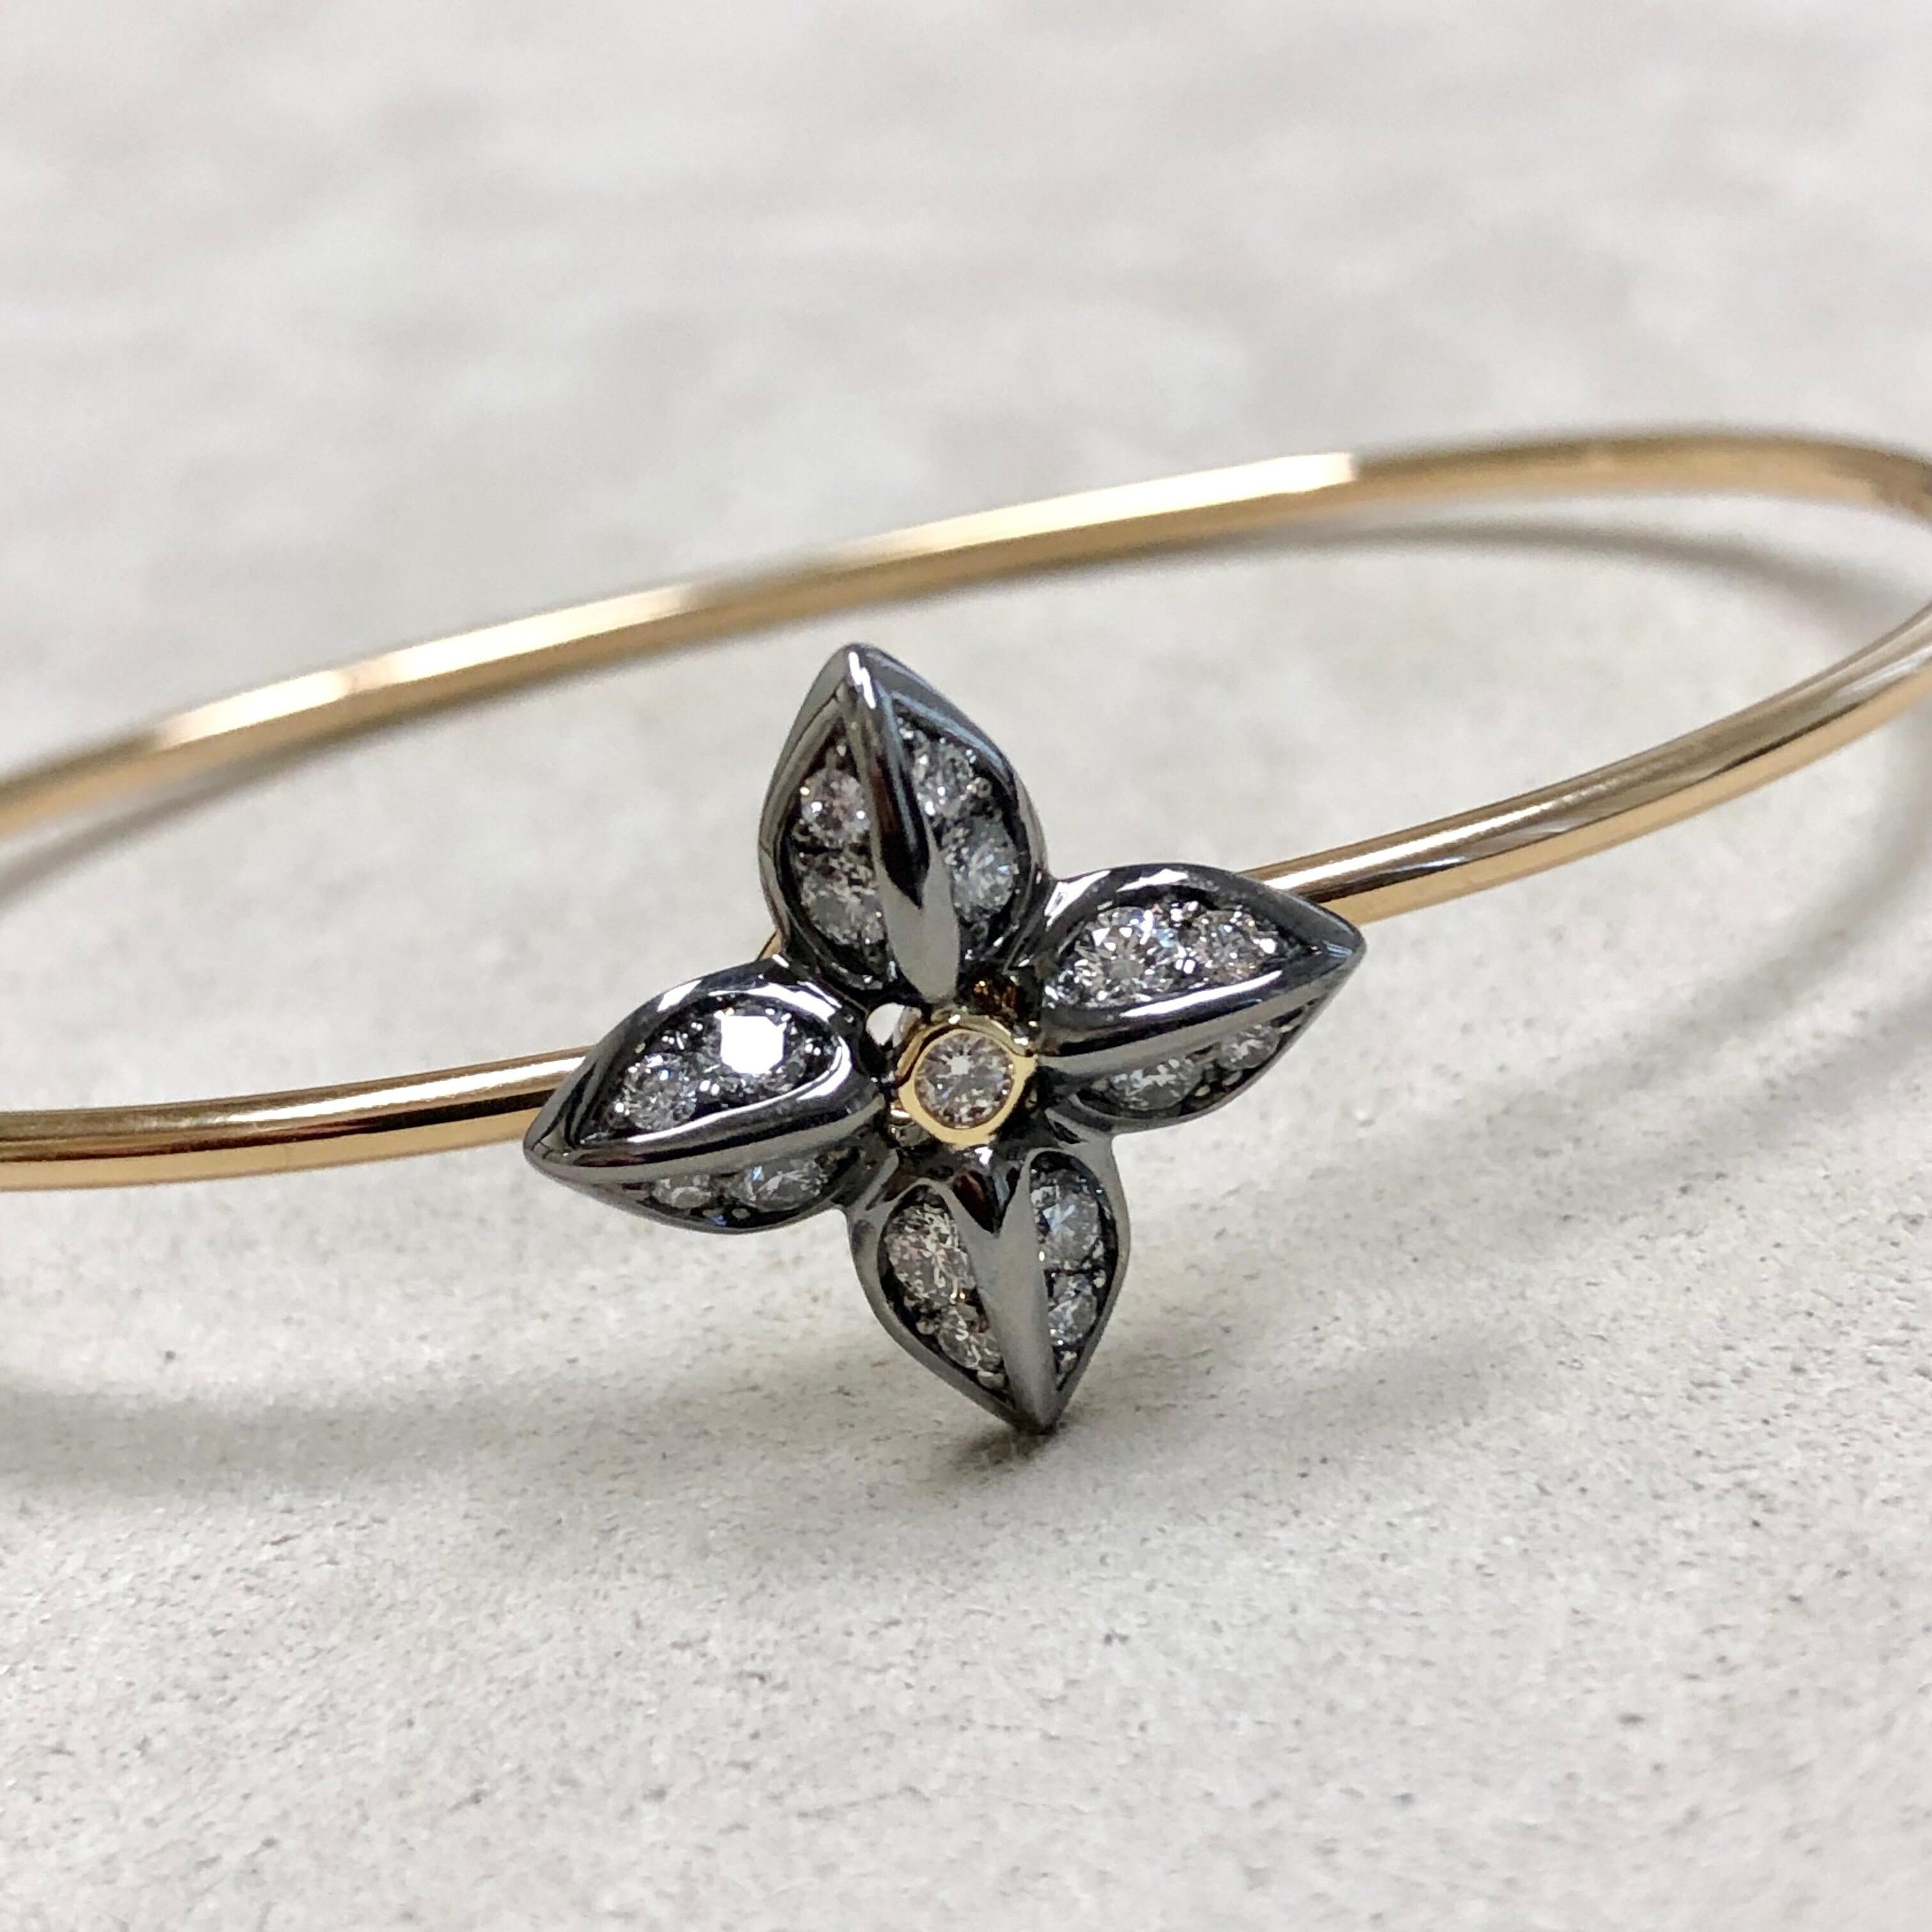 Created in 18 karat yellow gold & oxidized silver
Diamonds 0.55 ct approx
Openable oval bracelet 
Bracelet Inside wrap dimensions 66 mm by 59 mm 
Bracelet can be sized
Solid bangle wire
Limited edition 

Intricately crafted in 18 karat yellow gold